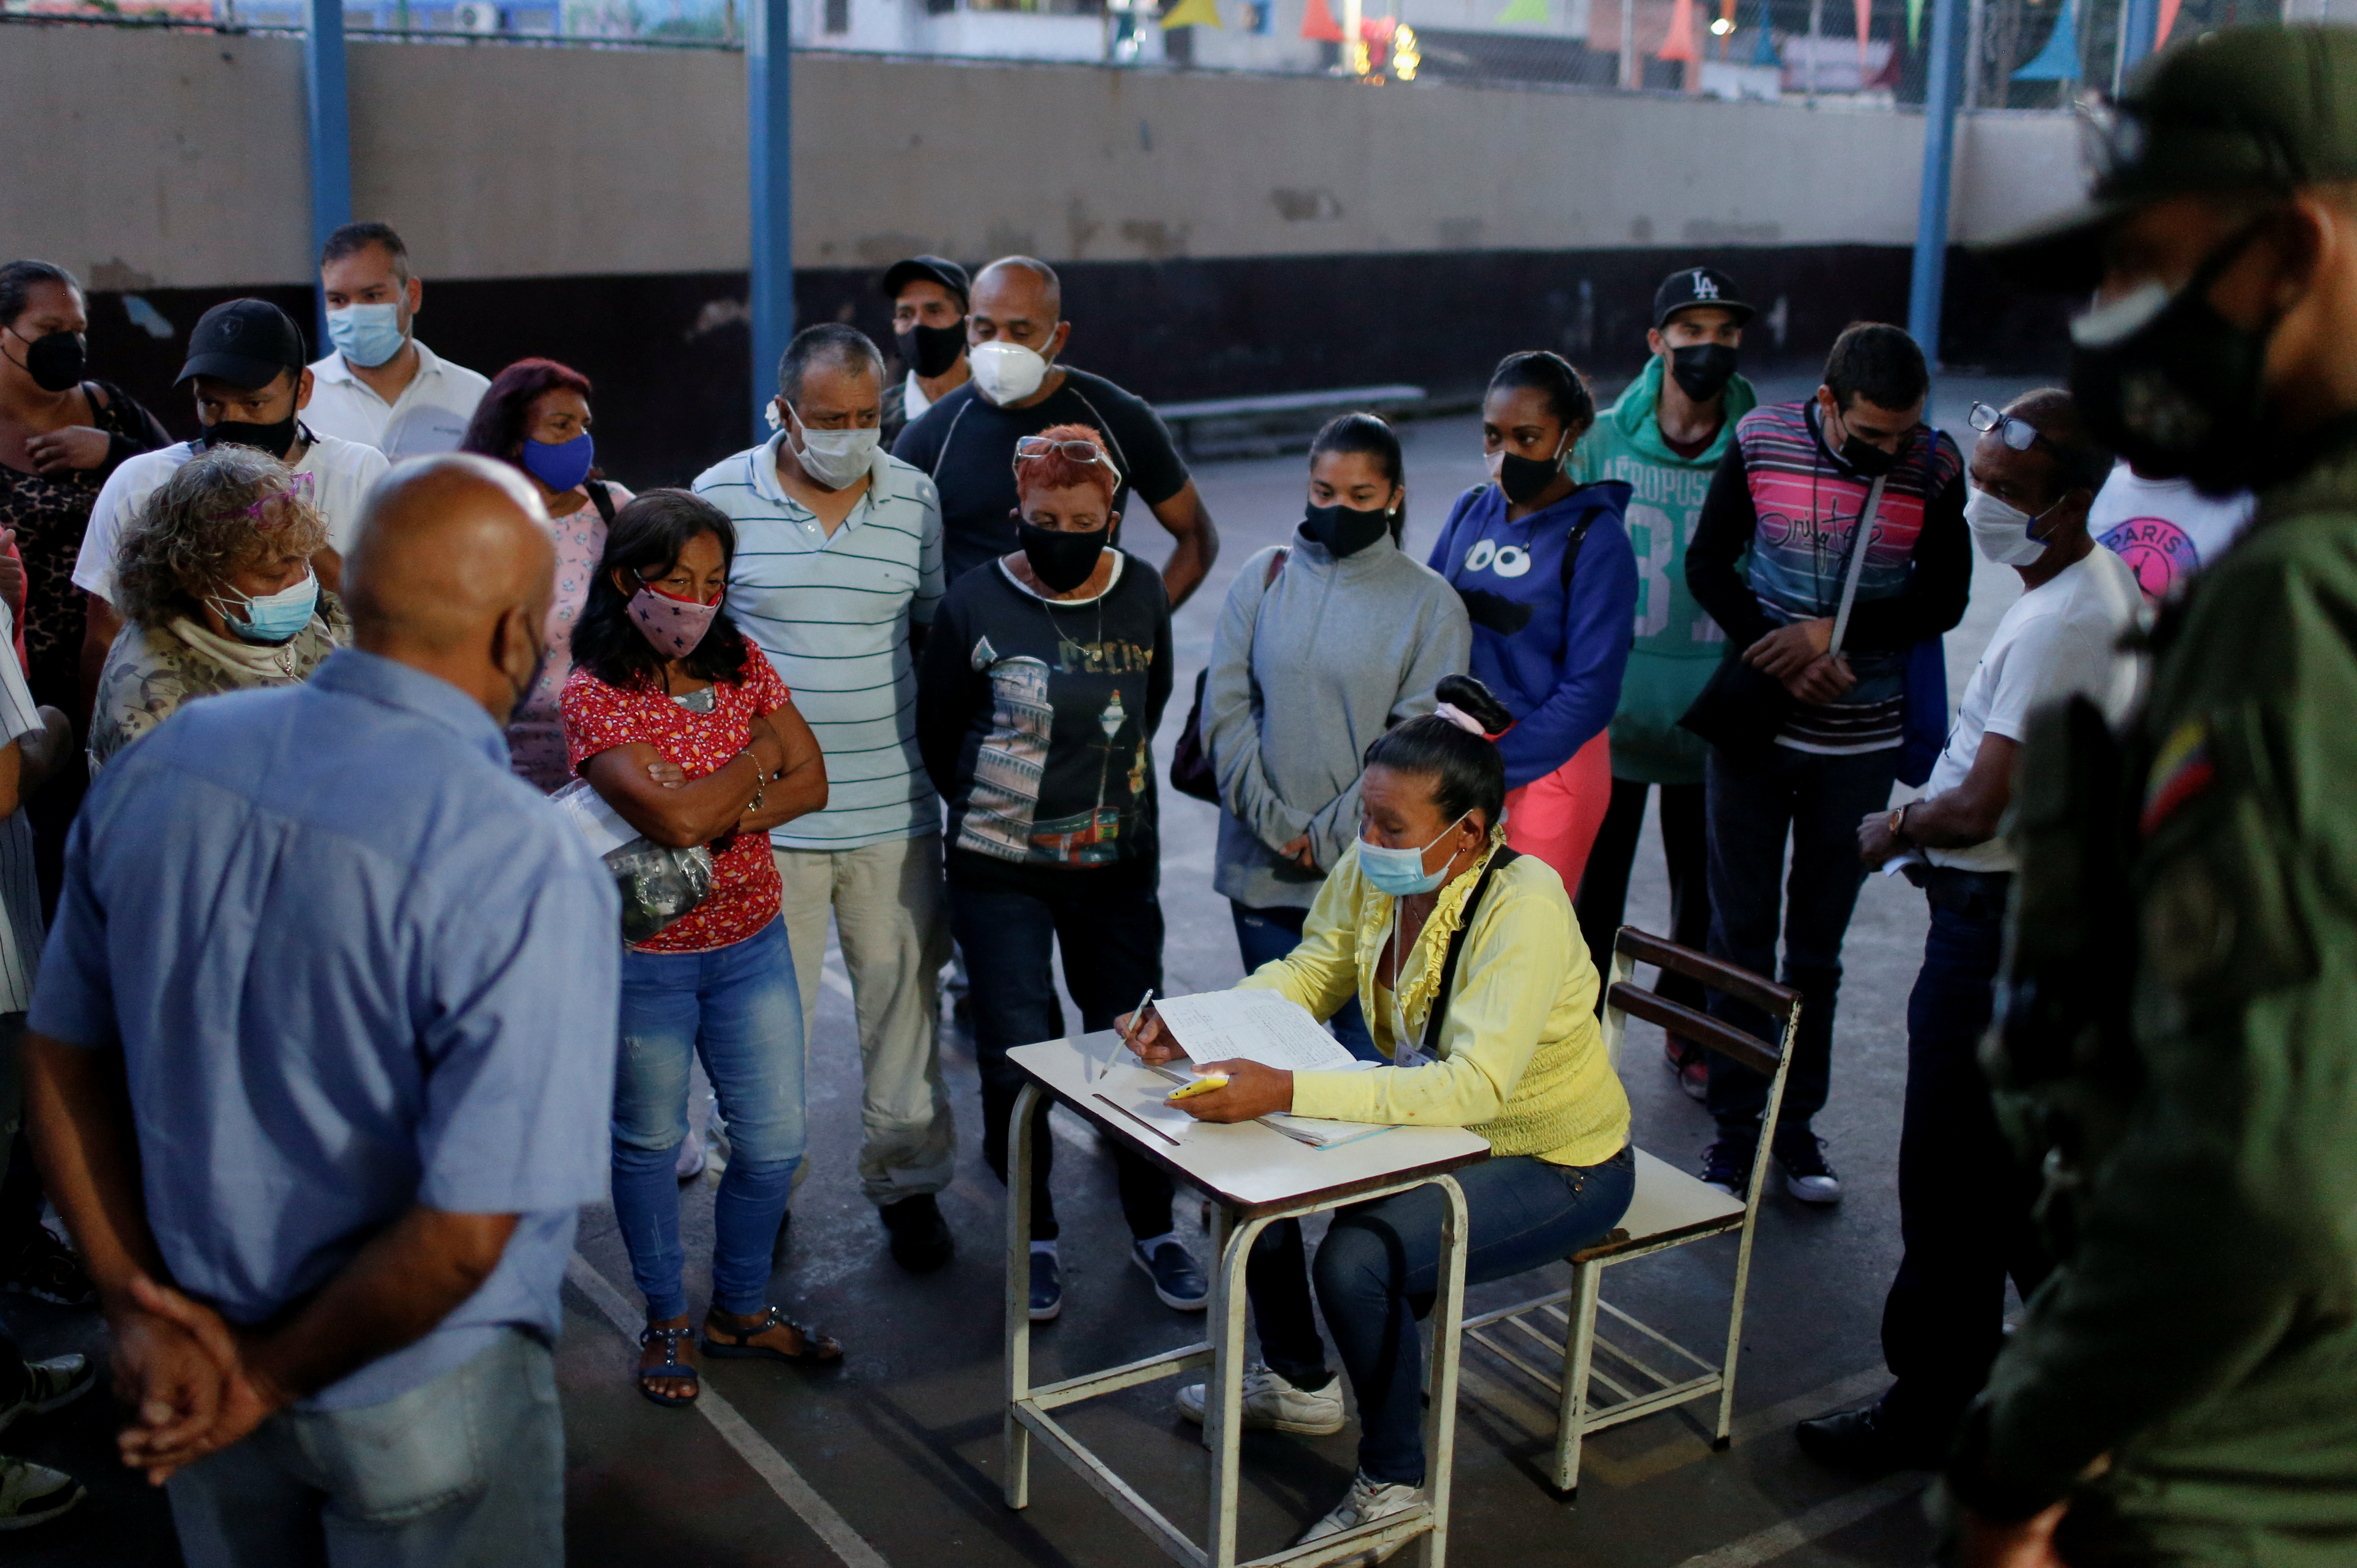 People wait for the opening of a table to vote in the election for state governors and local mayors, in Caracas, Venezuela November 21, 2021. REUTERS/Leonardo Fernandez Viloria